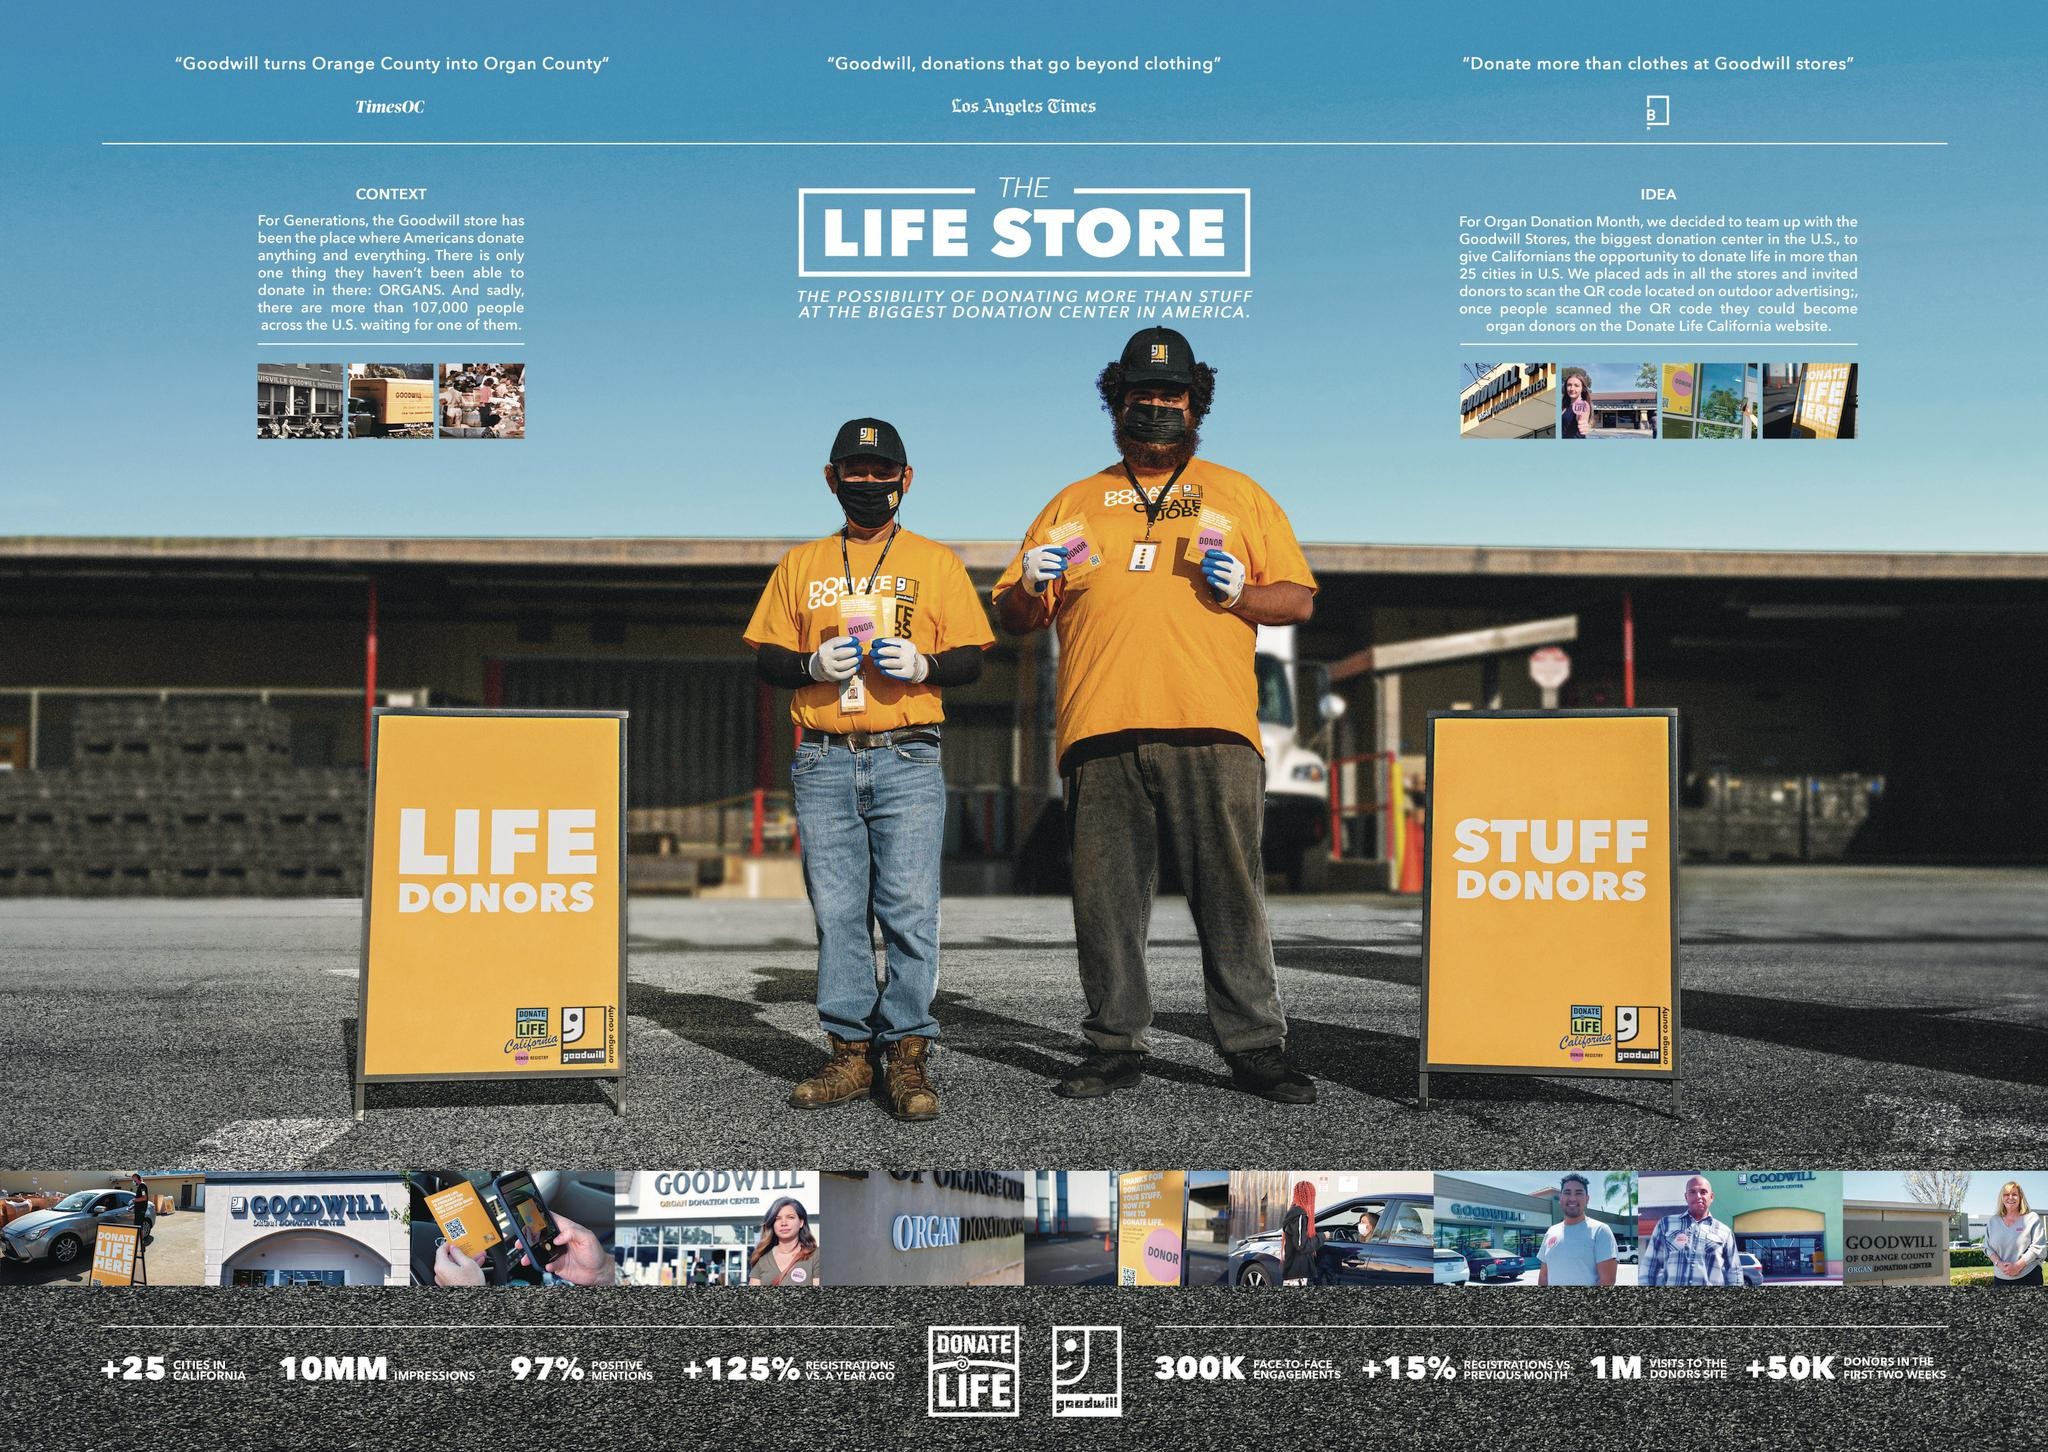 THE LIFE STORE